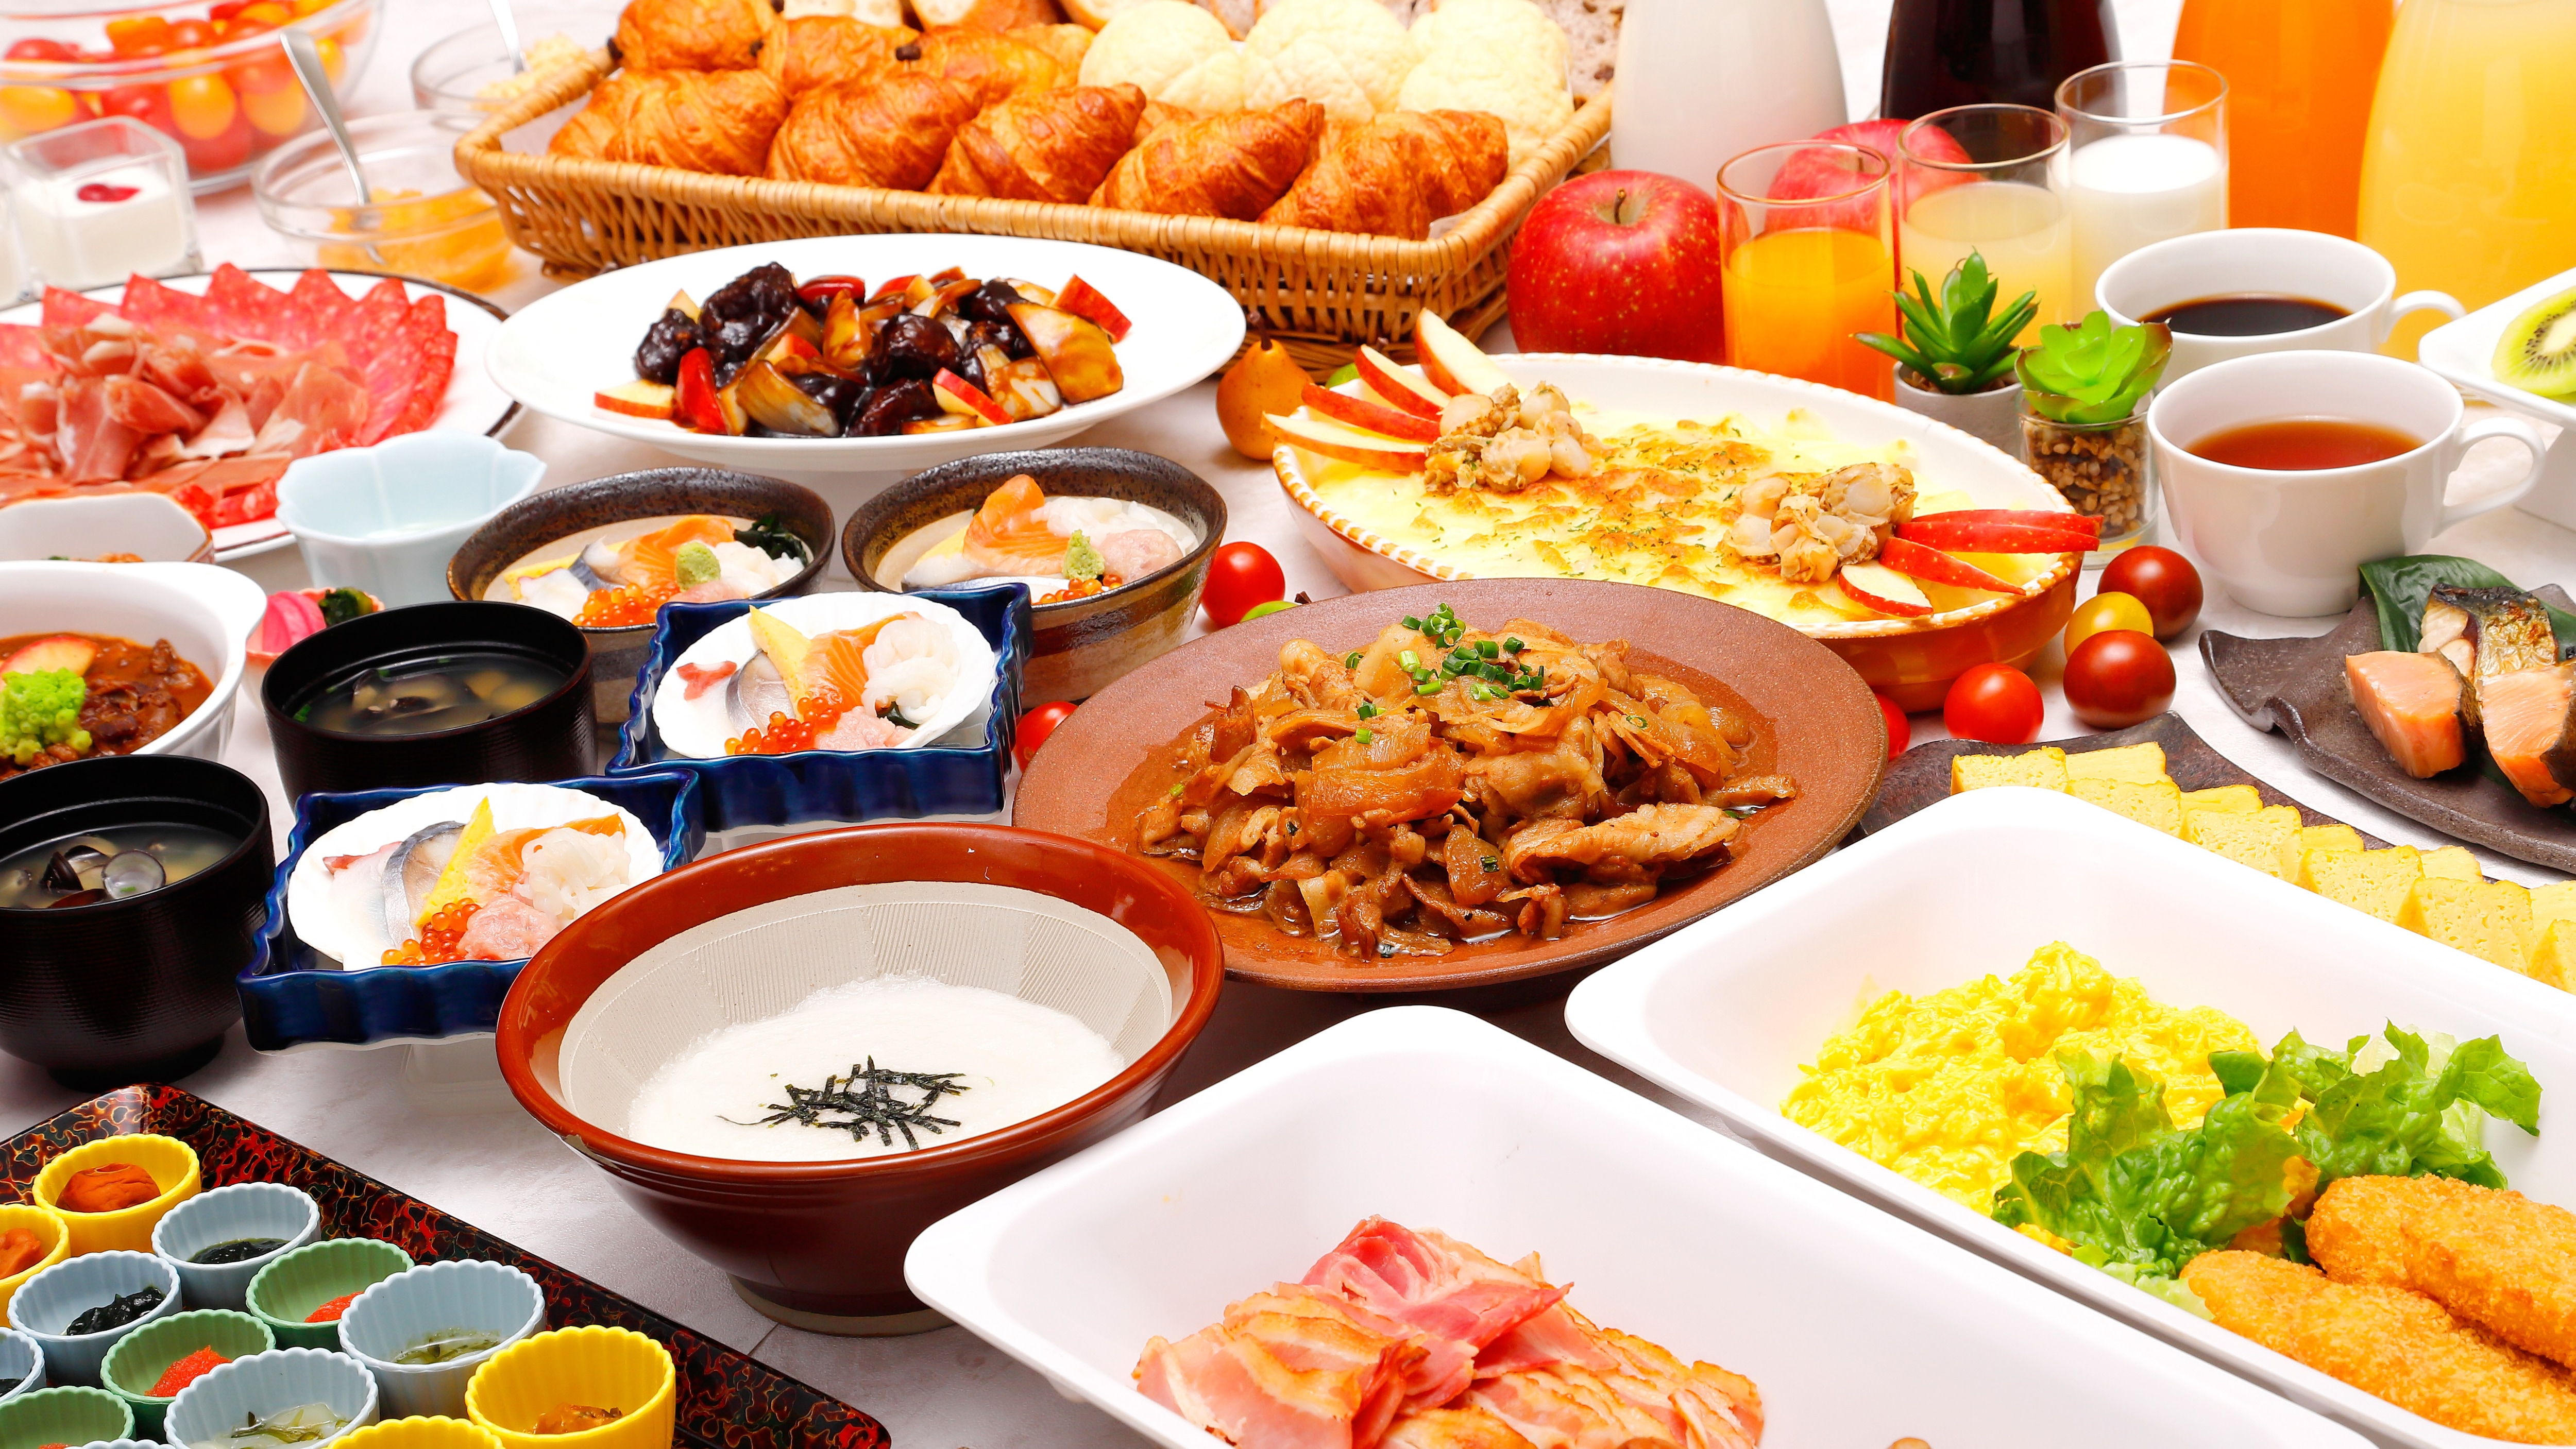 Breakfast offers over 40 dishes at the buffet